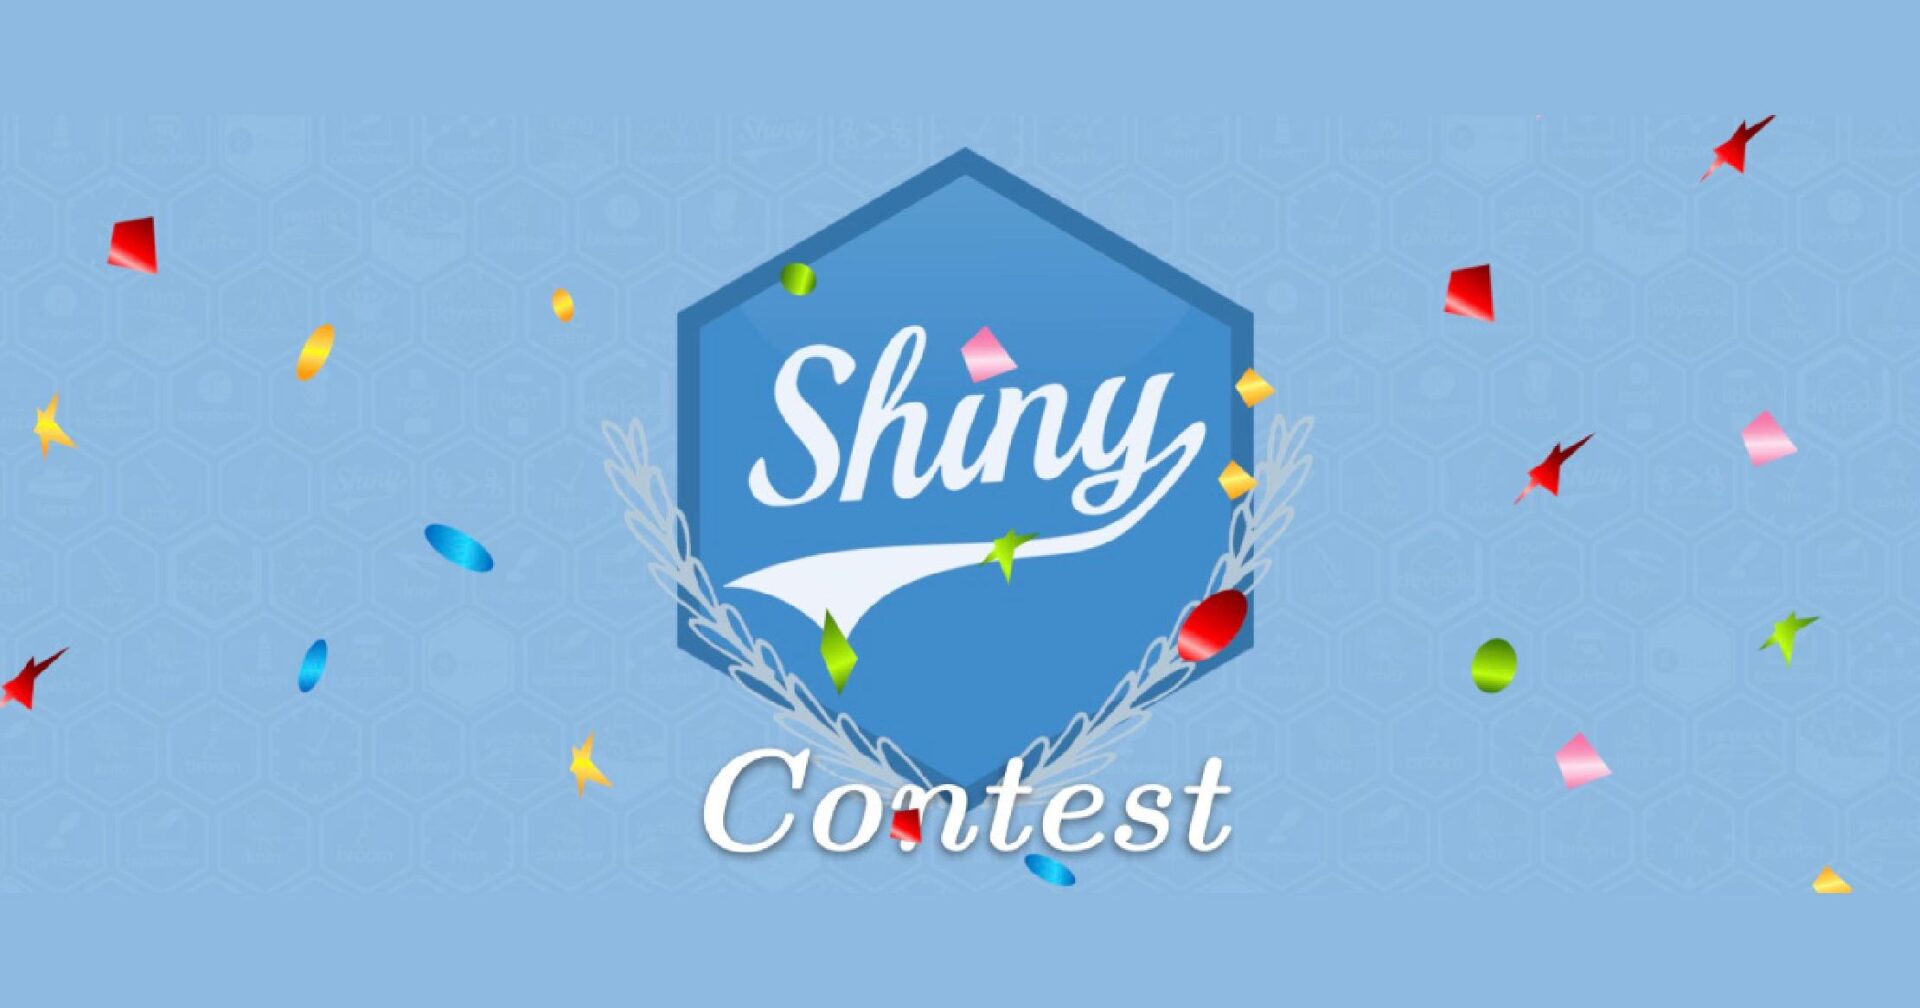 The Shiny hex logo with the text saying Contest underneath. Confetti floats around the hex.